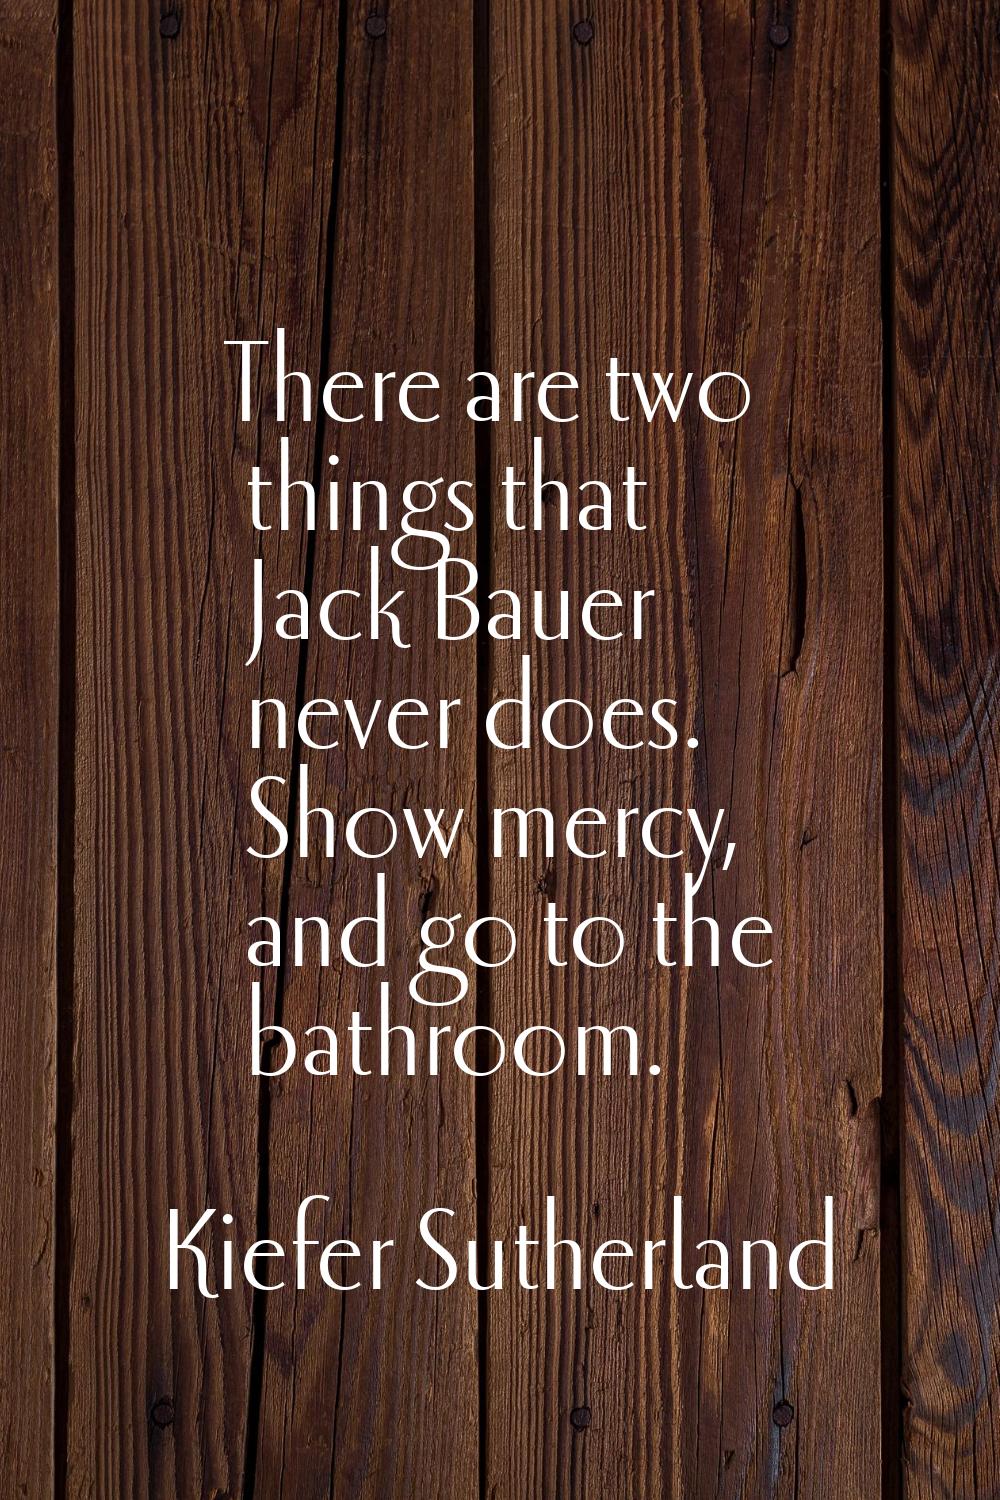 There are two things that Jack Bauer never does. Show mercy, and go to the bathroom.